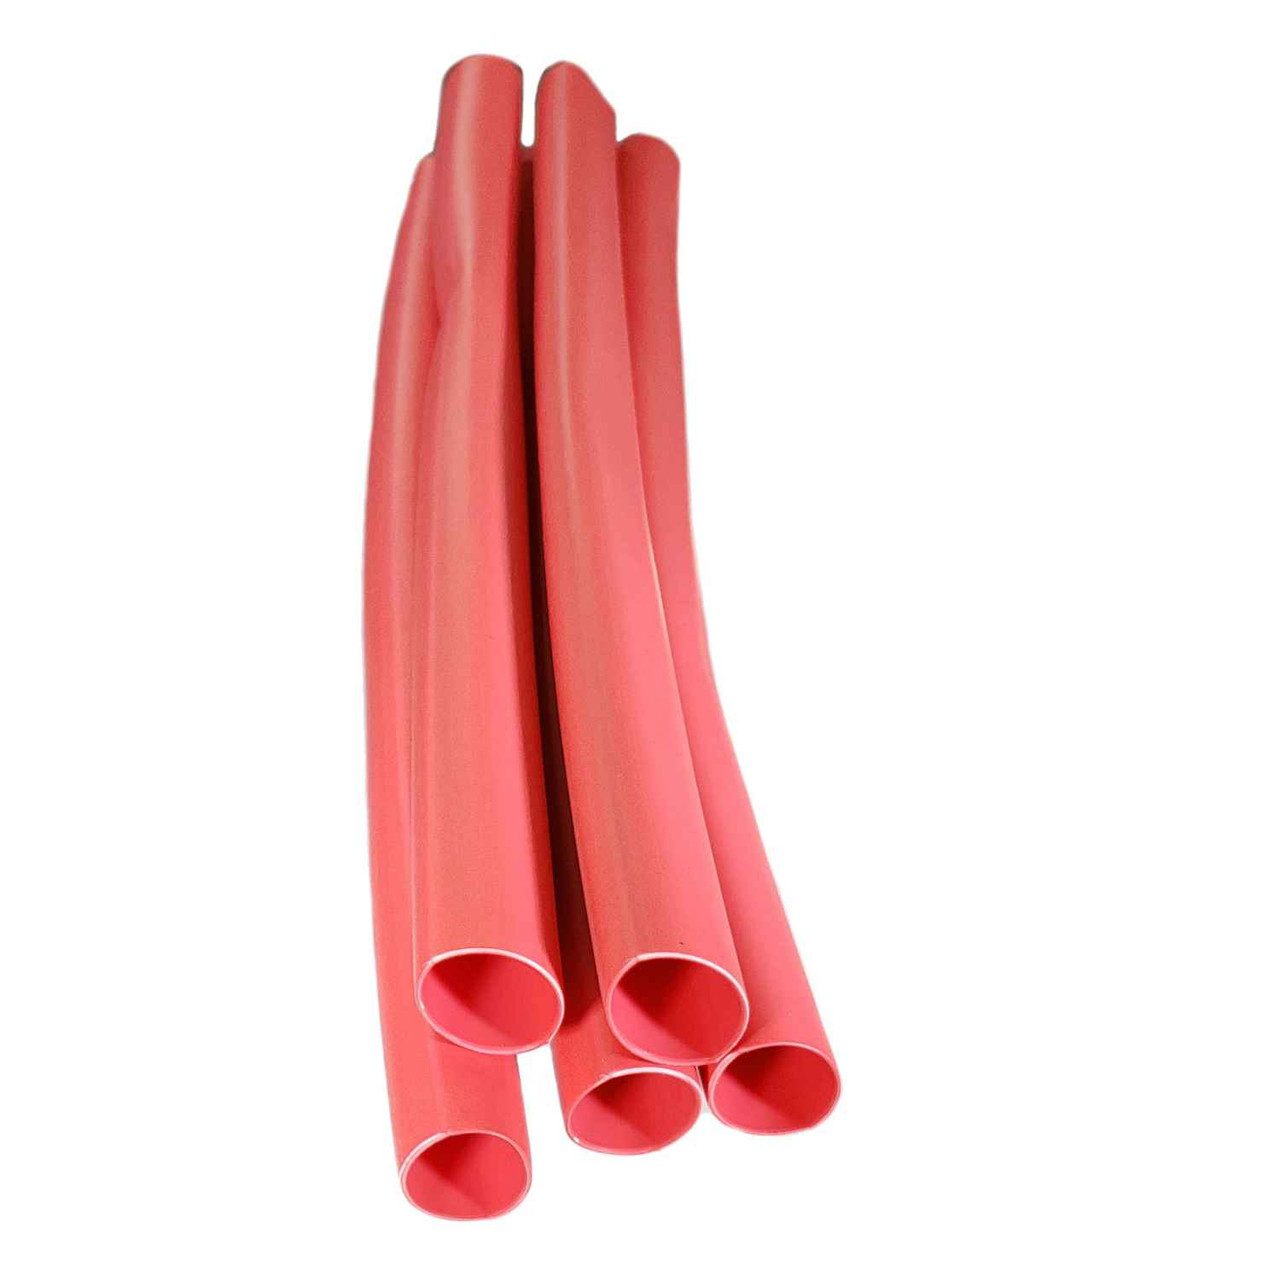 Expandable Braided Sleeving 3/8 Inch Red